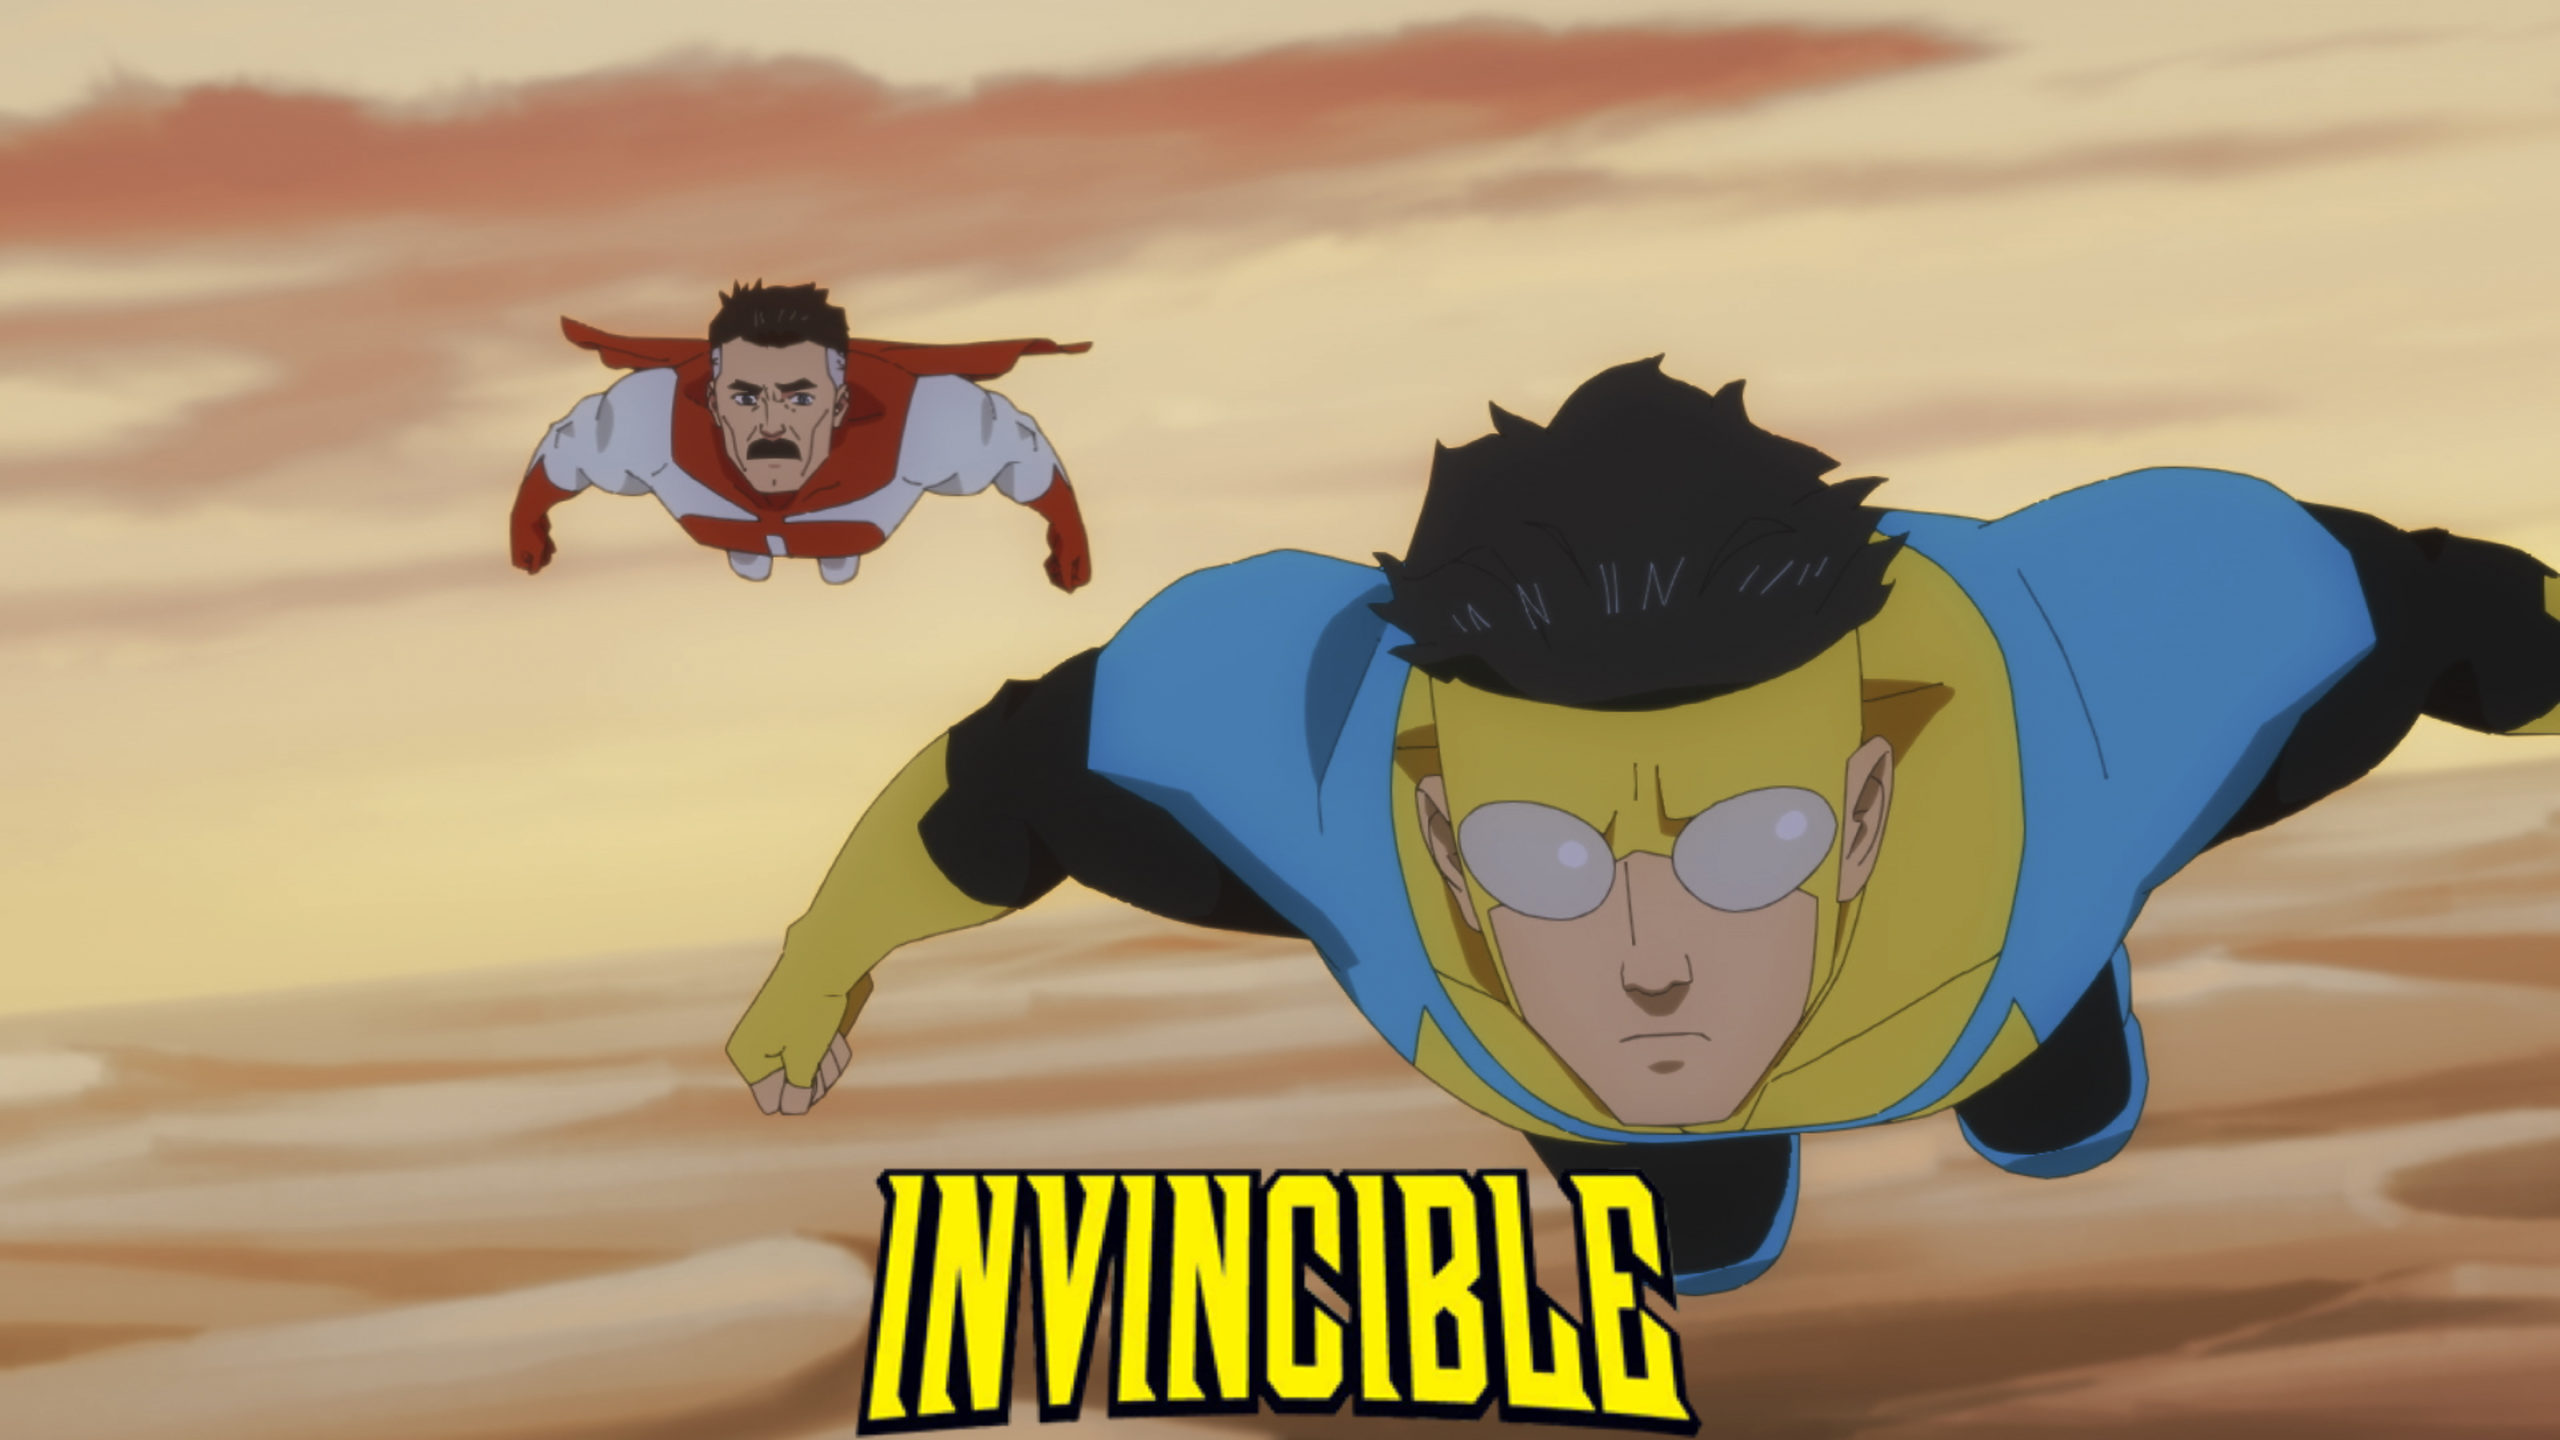 Invincible Season 2 Is On Its Way With New Footage Of Steven Yeun Back in the Booth